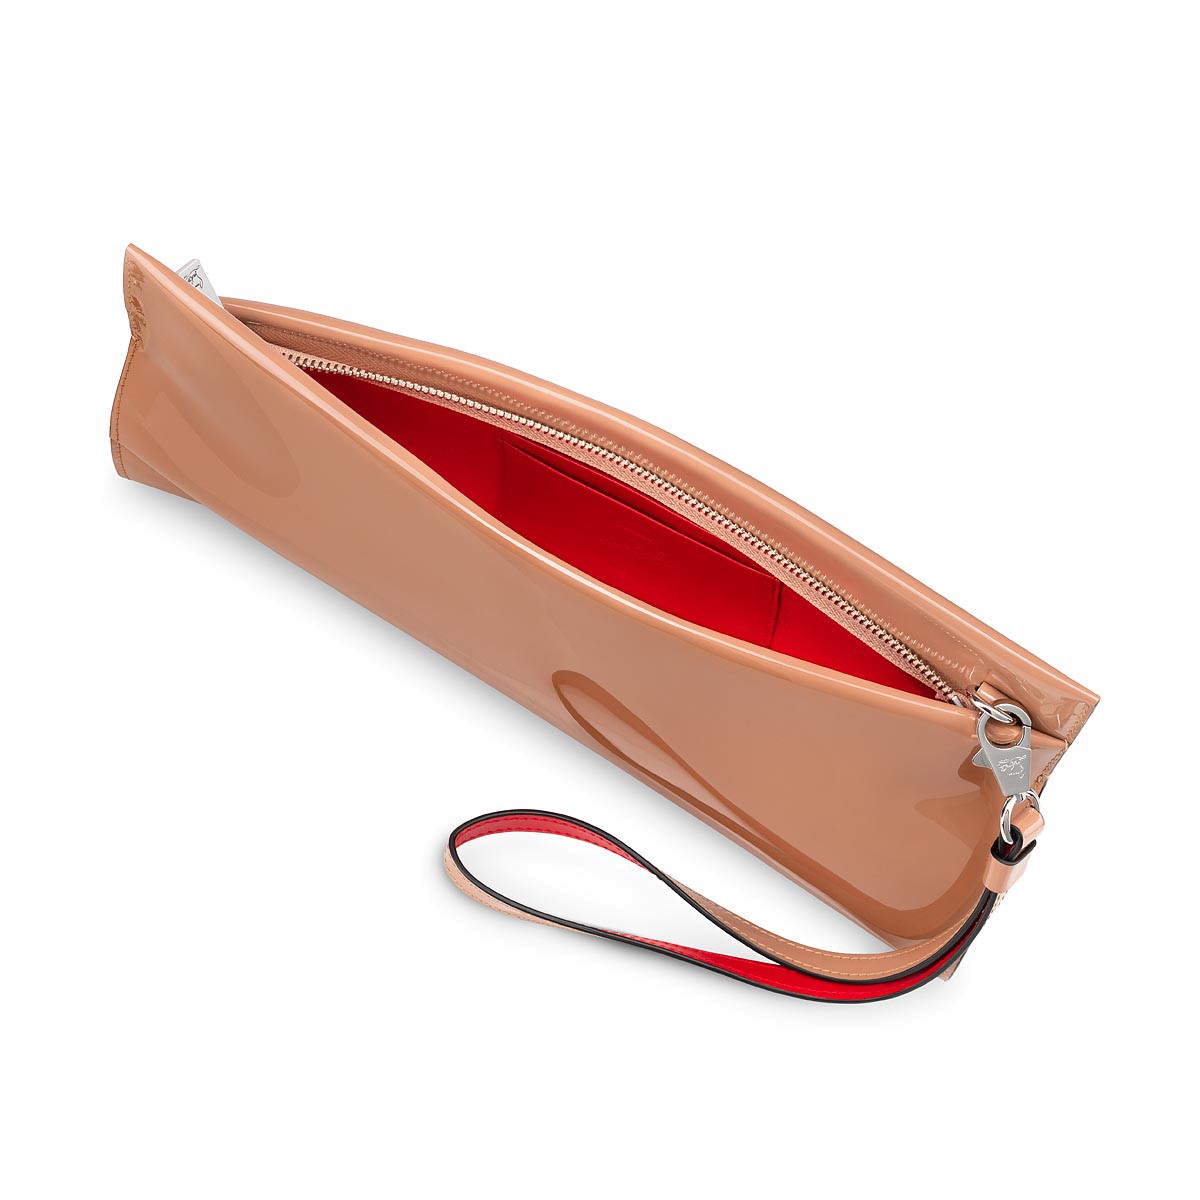 Shop Christian Louboutin Bags by MFStyle